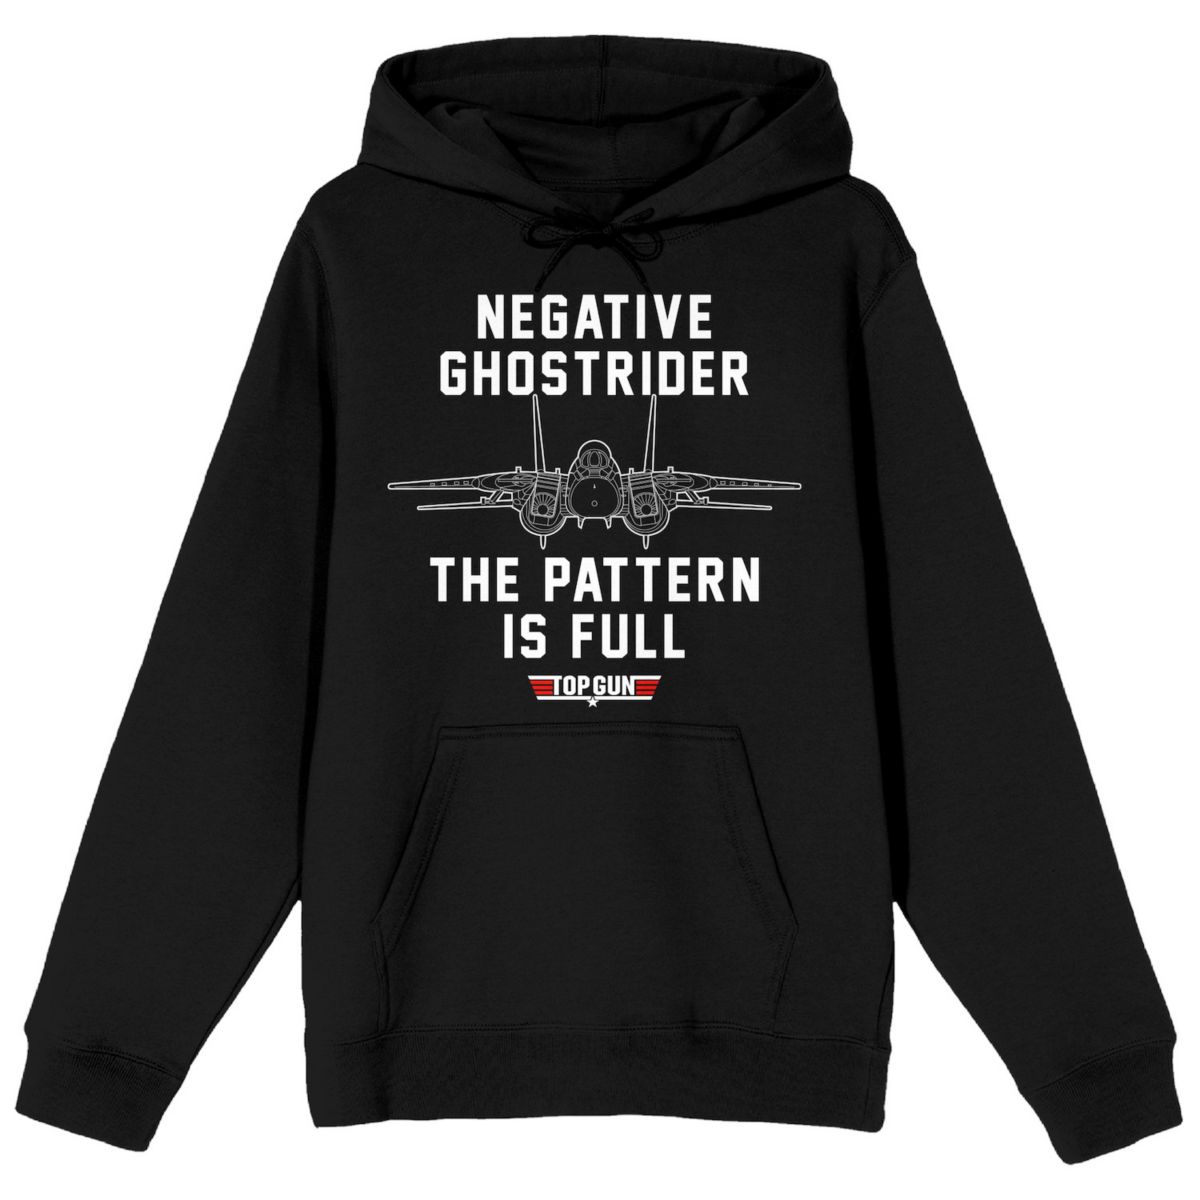 Negative ghostrider the pattern is full gif